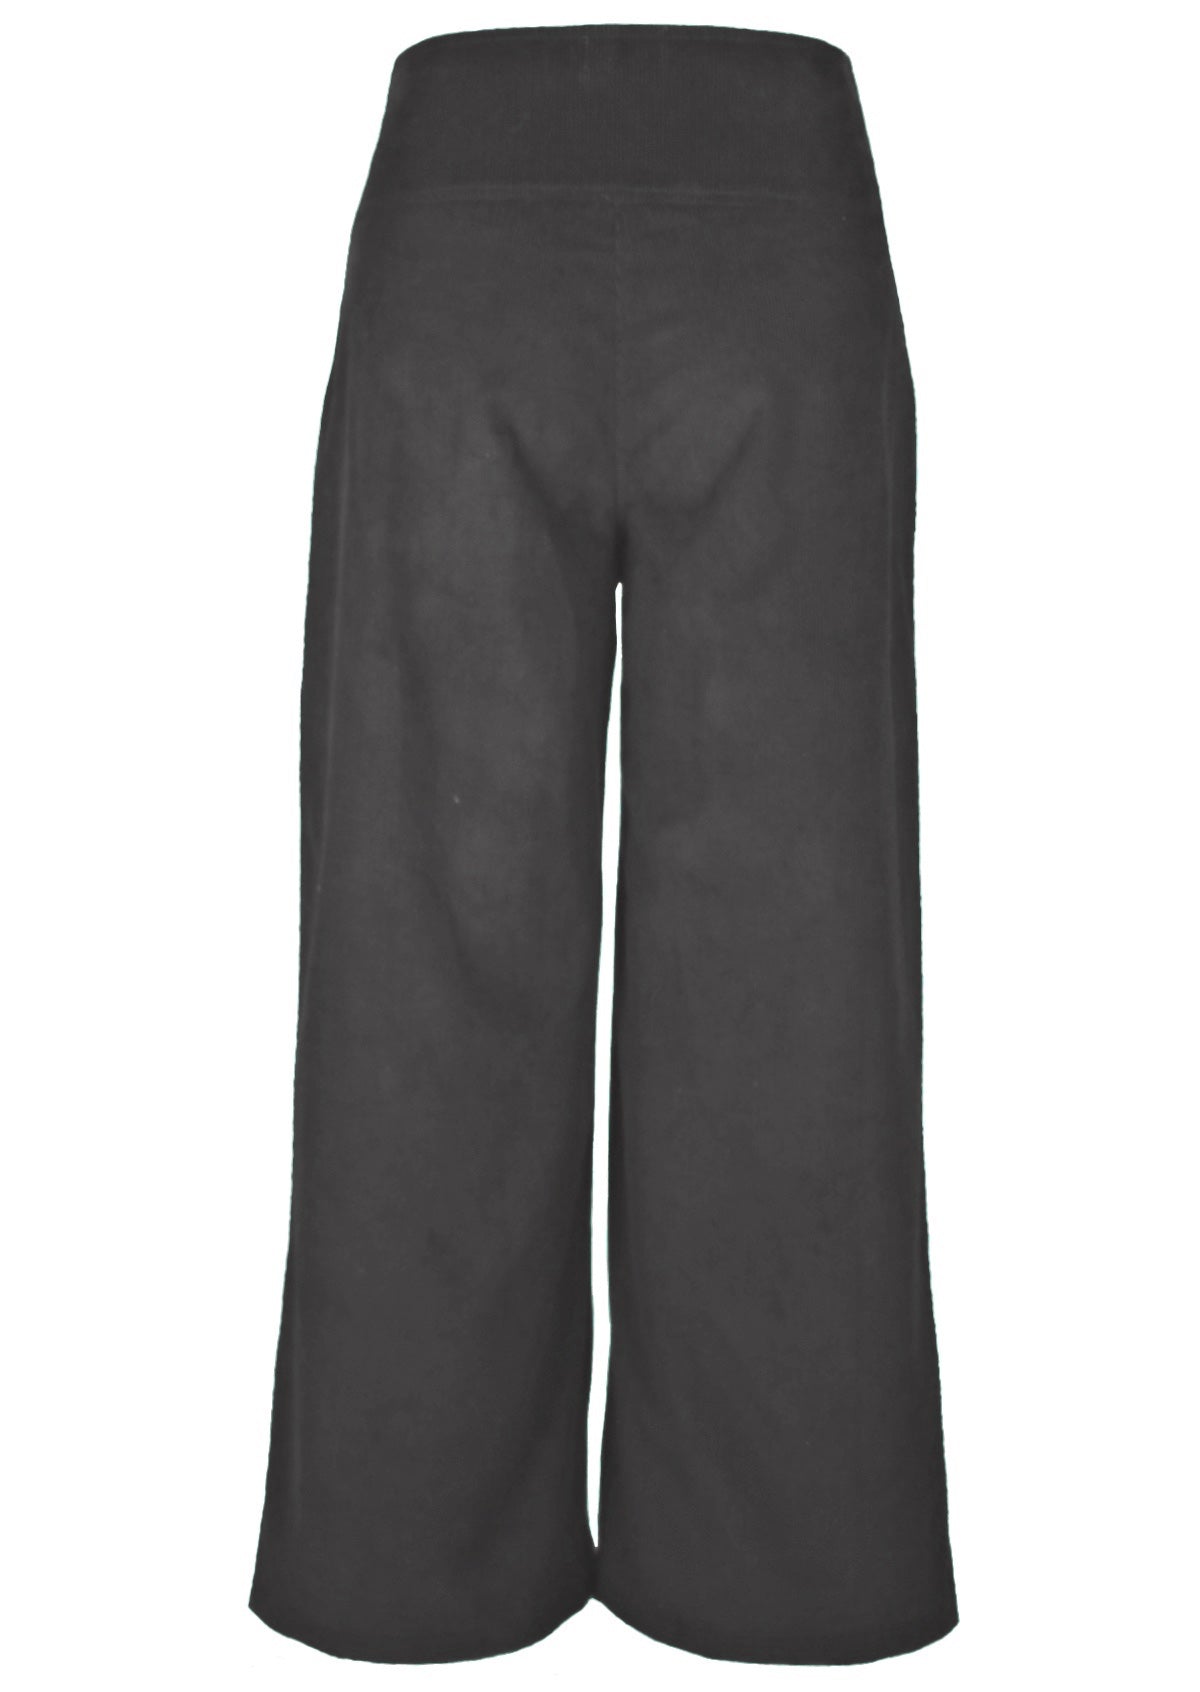 100% cotton corduroy pants have pockets and wide legs. 